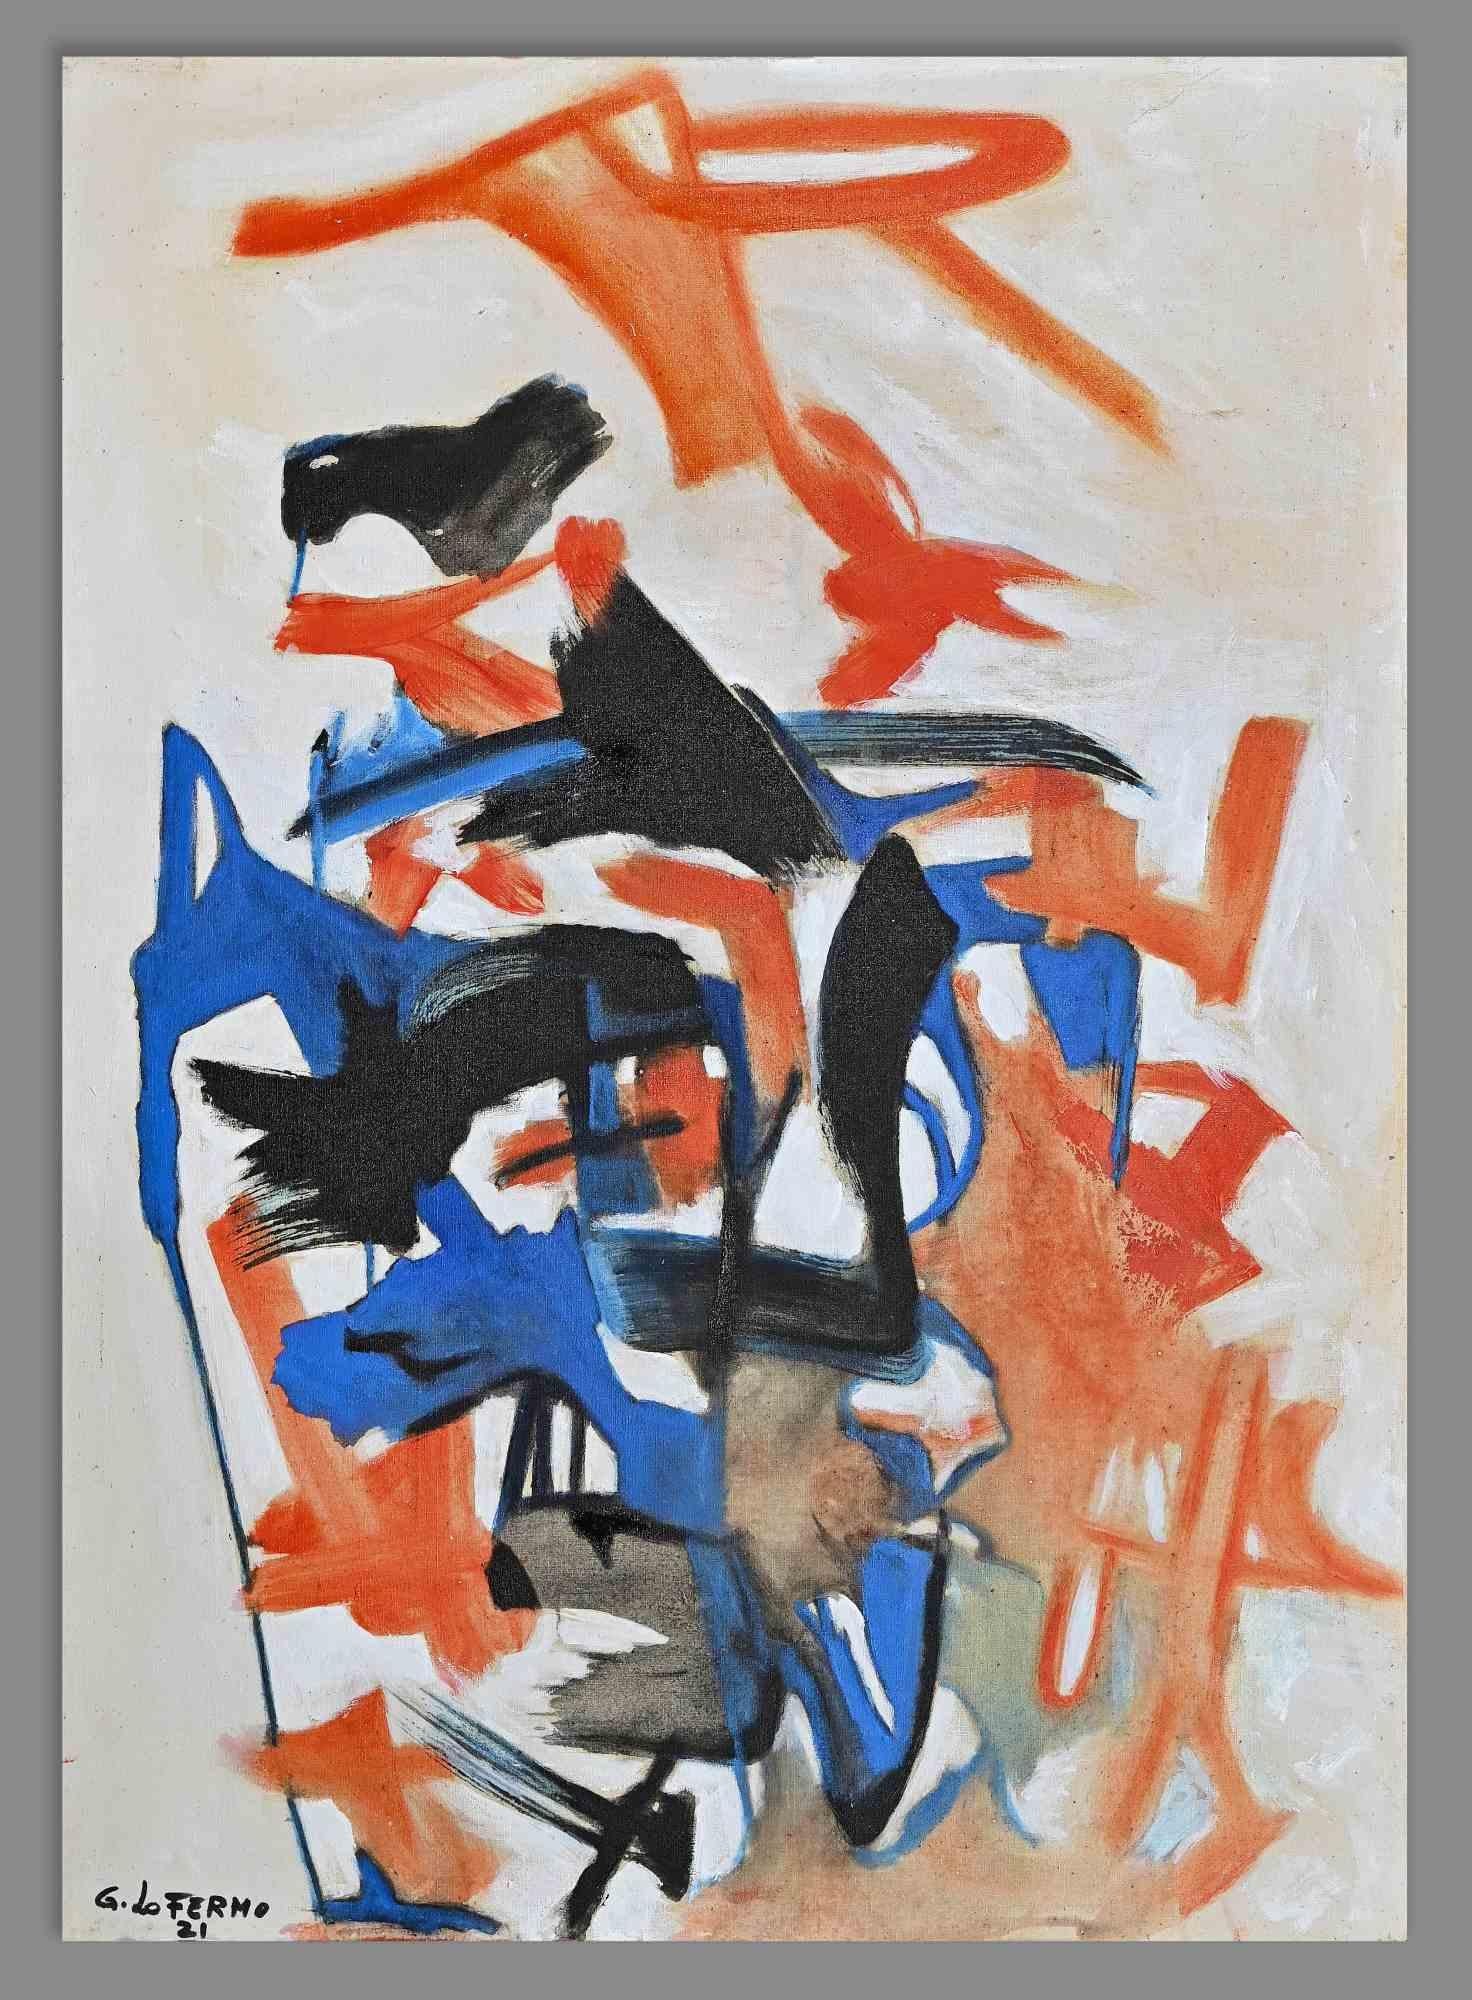 Abstract Expression is an original artwork realized by Giorgio Lo Fermo (b. 1947) in 2021.

Original Oil Painting on Canvas.

Hand signed and dated on the lower left margin.

Origina title: Espressionismo astratto

Hand-signed, titled and dated on